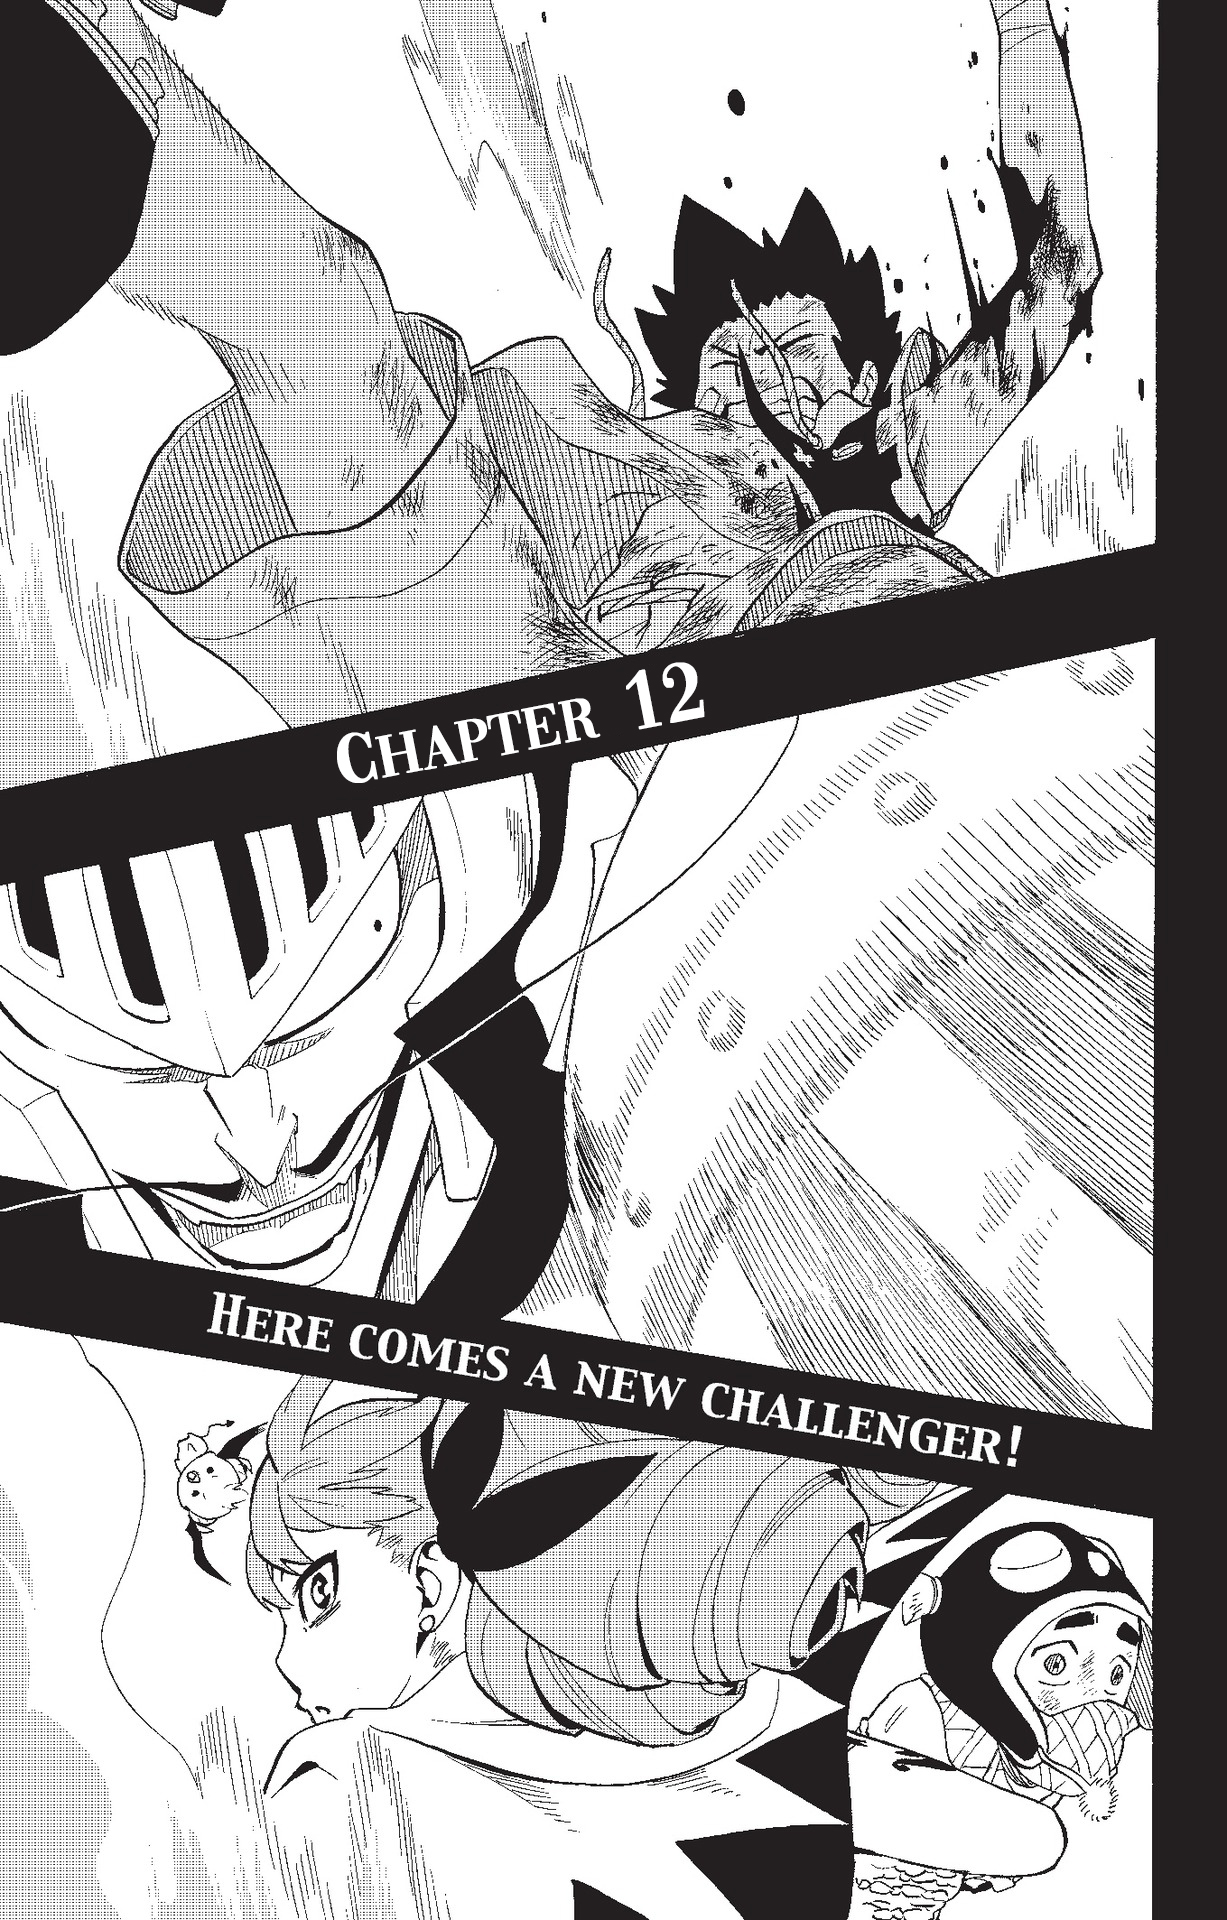 Radiant Vol. 2 Ch. 12 Here comes a new Challenger